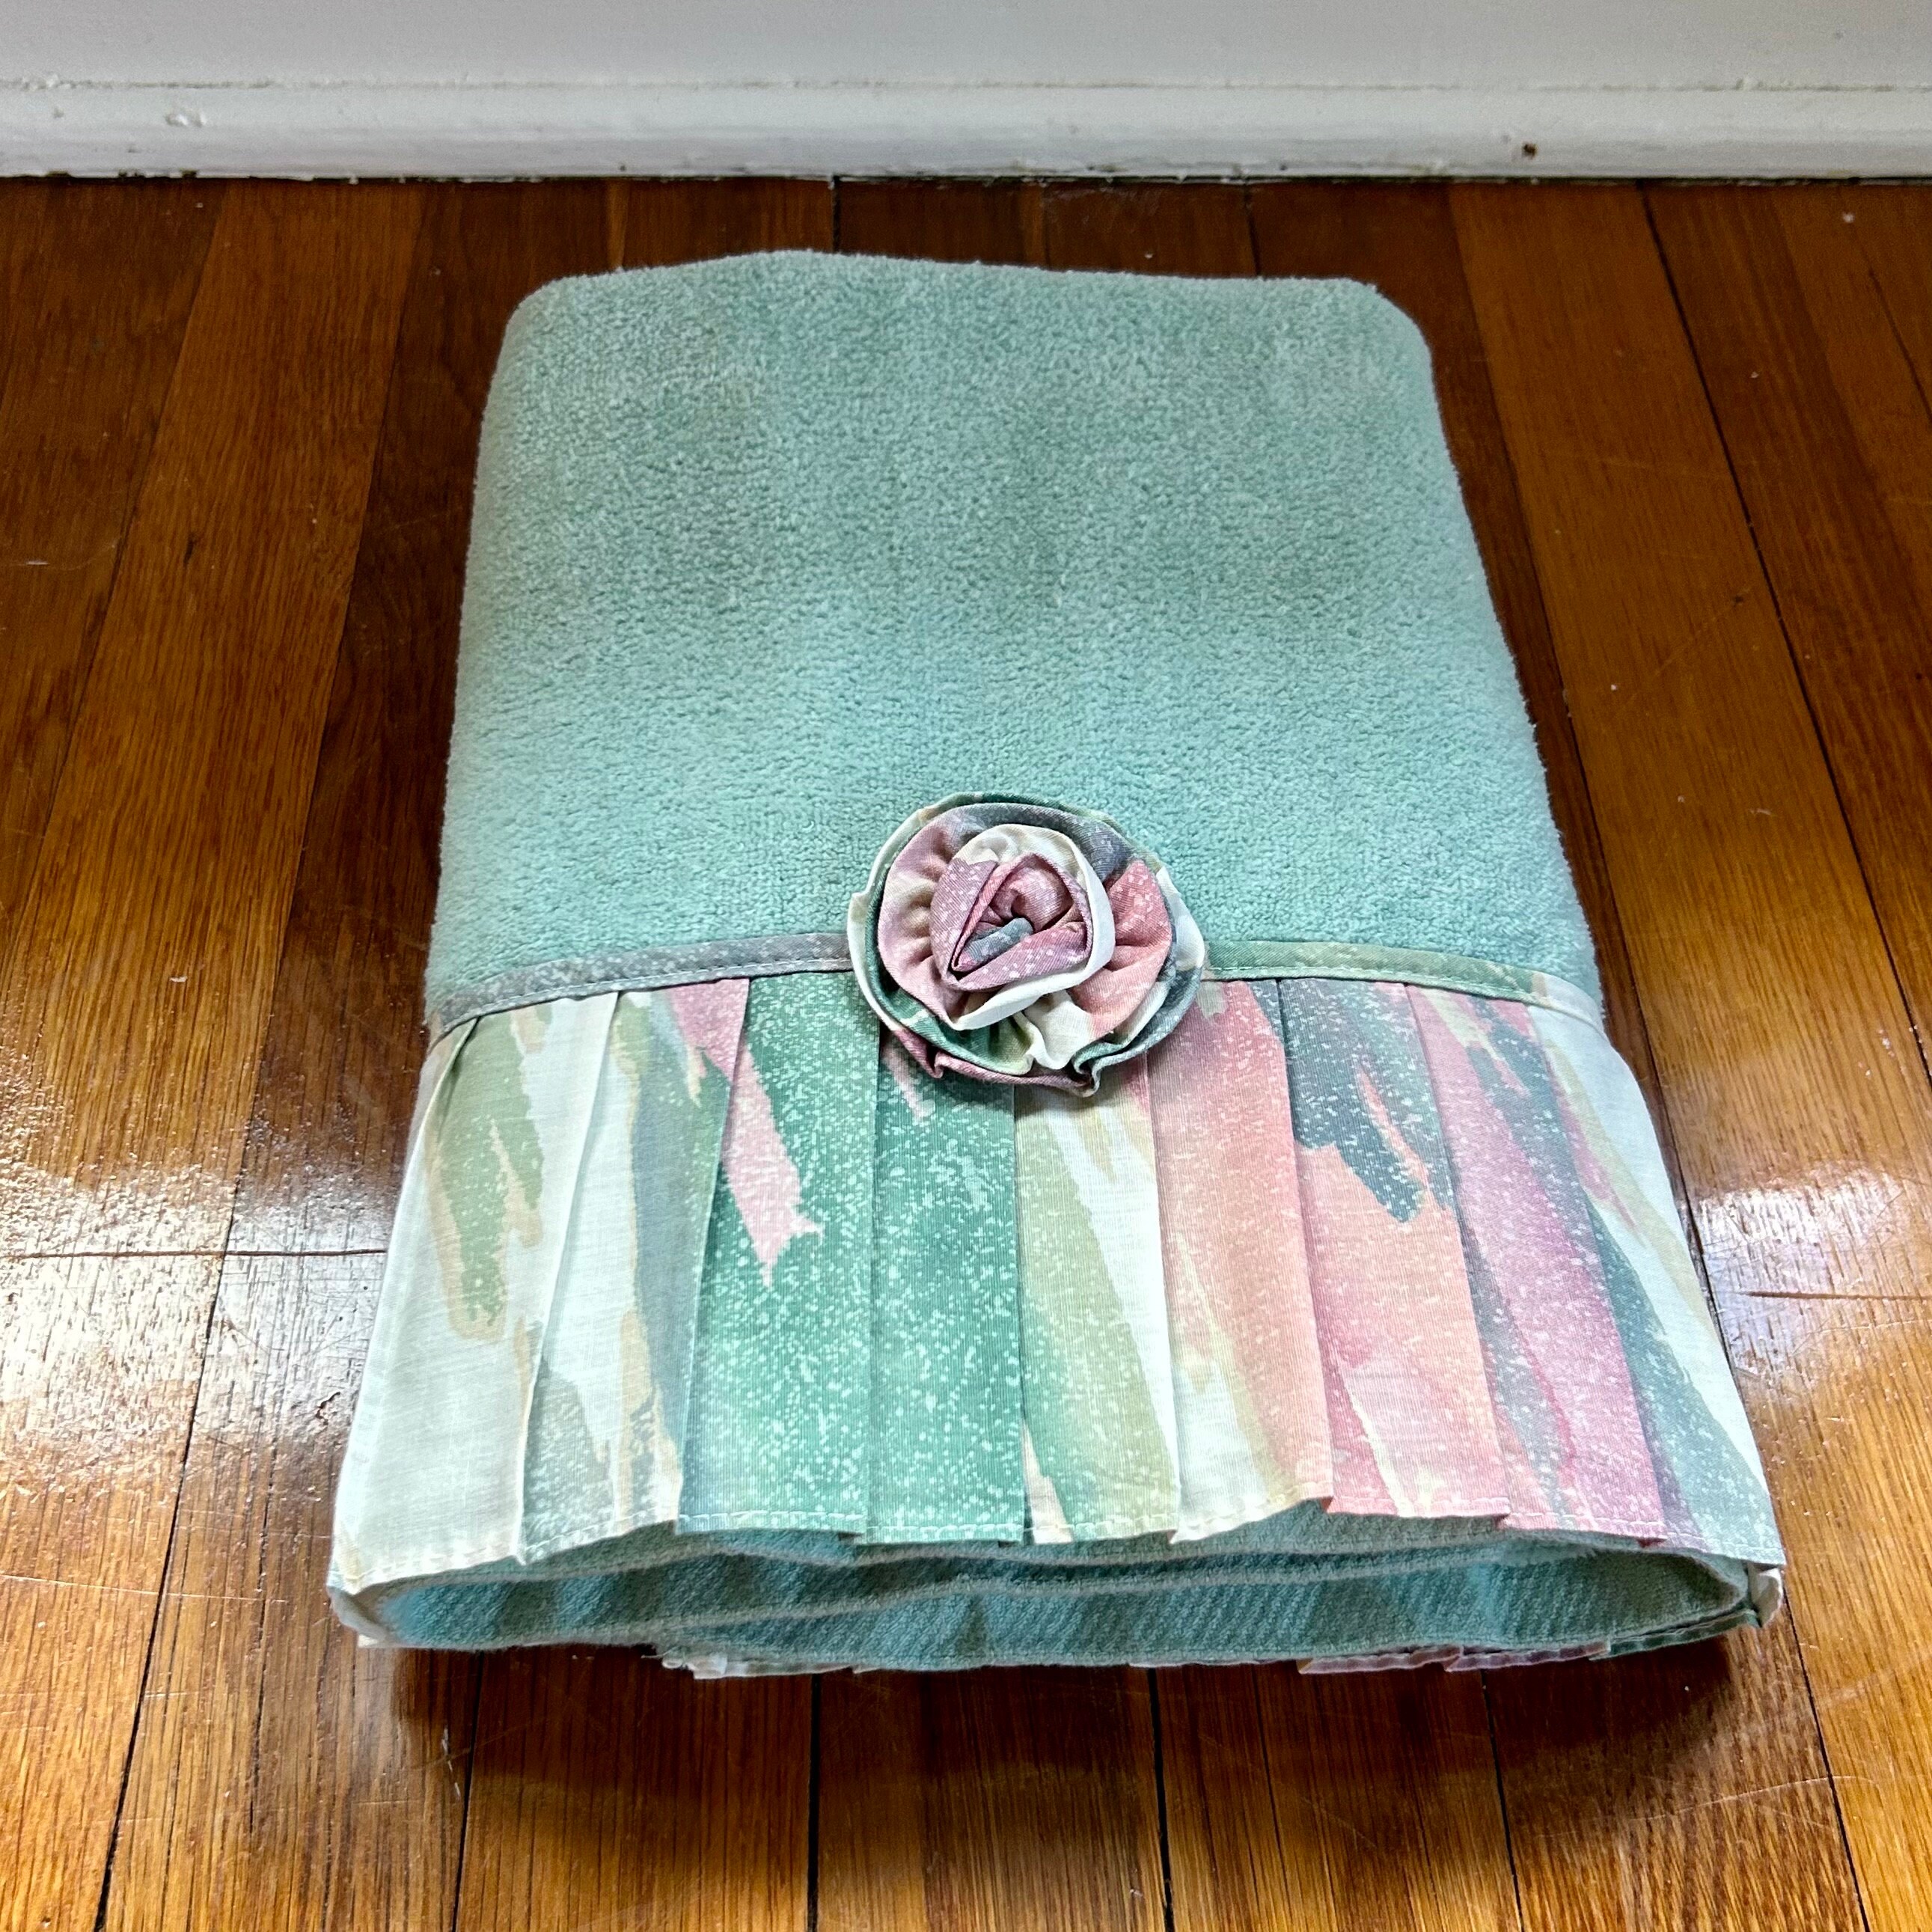 Seafoam Hotel Hand Towel, Green, Cotton Sold by at Home